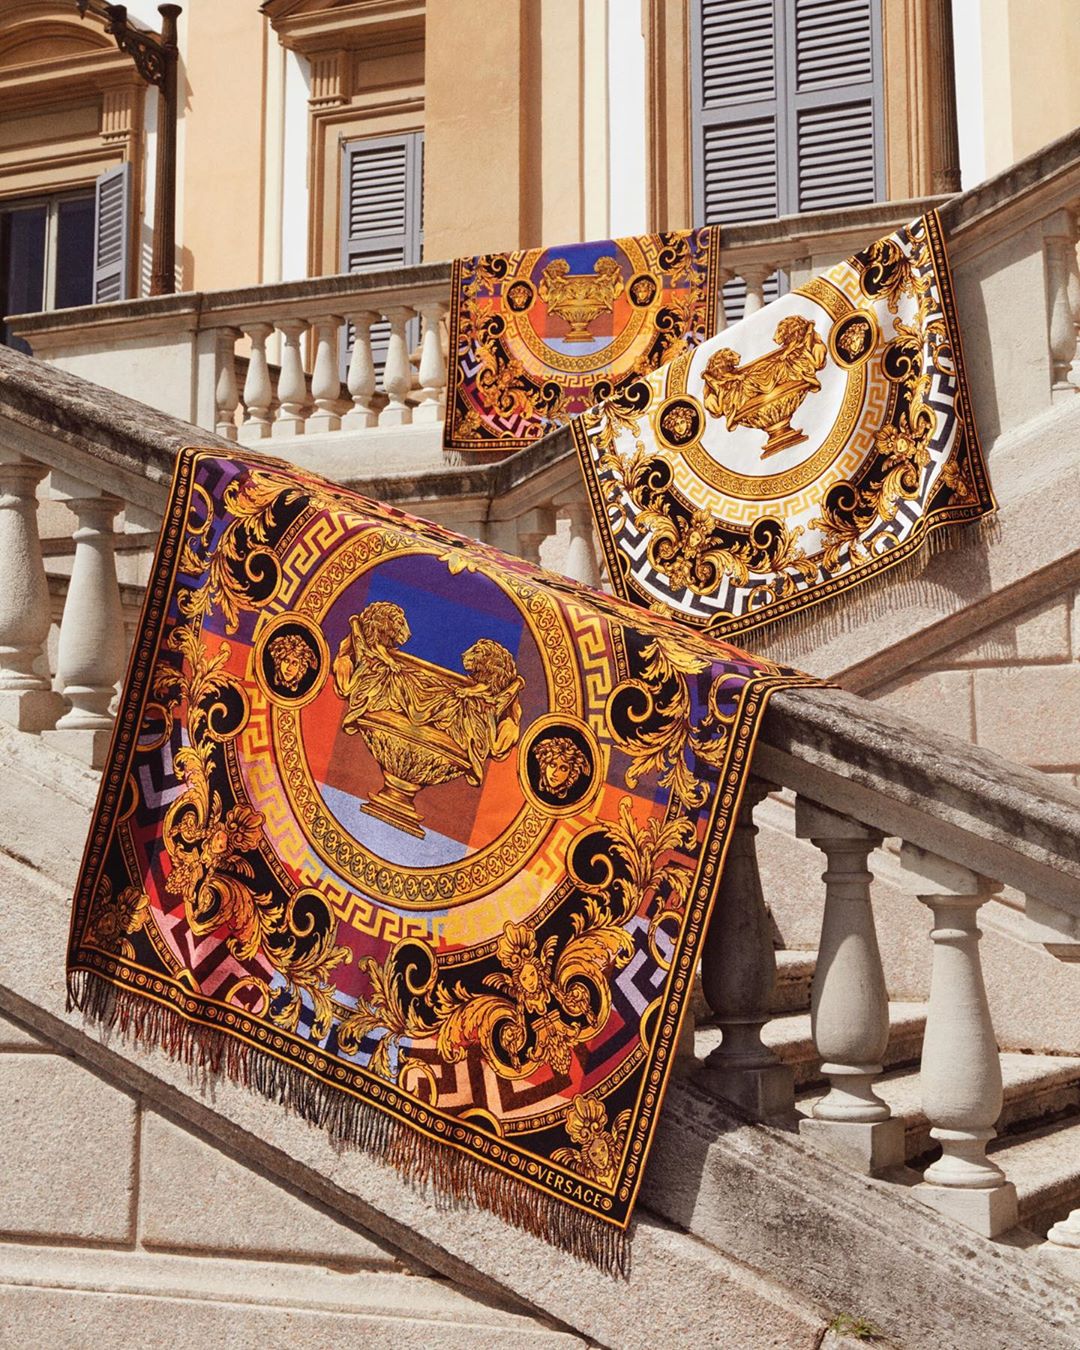 Versace - Hanging out - #VersaceHome takes over the Villa Reale. #AtHomeWithVersace